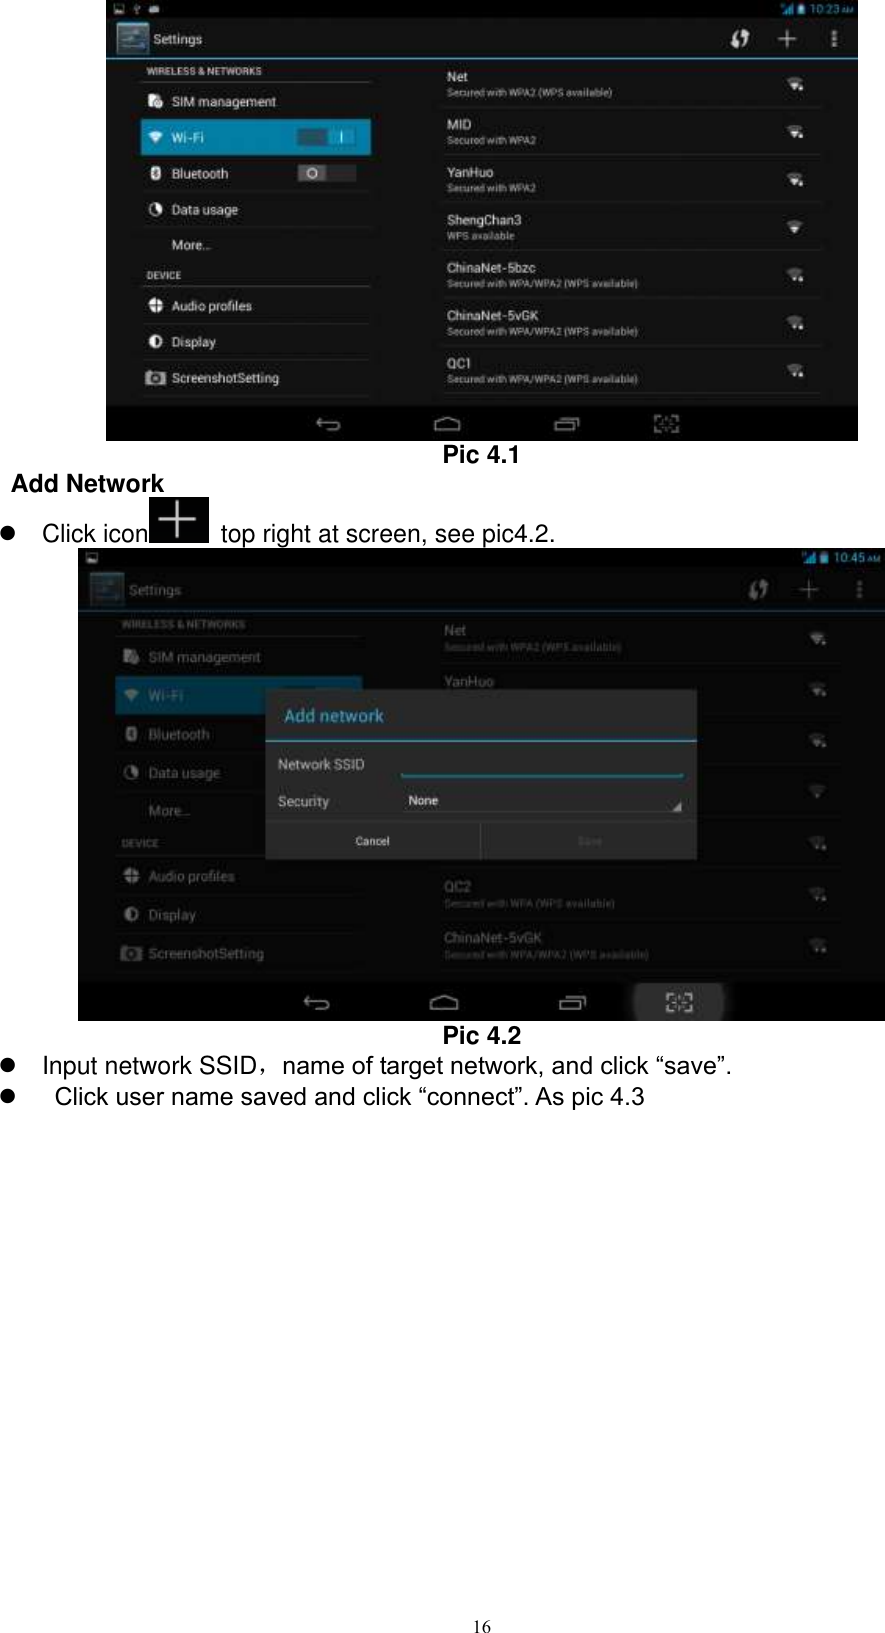      16  Pic 4.1 Add Network   Click icon   top right at screen, see pic4.2.  Pic 4.2   Input network SSID，name of target network, and click “save”.     Click user name saved and click “connect”. As pic 4.3 